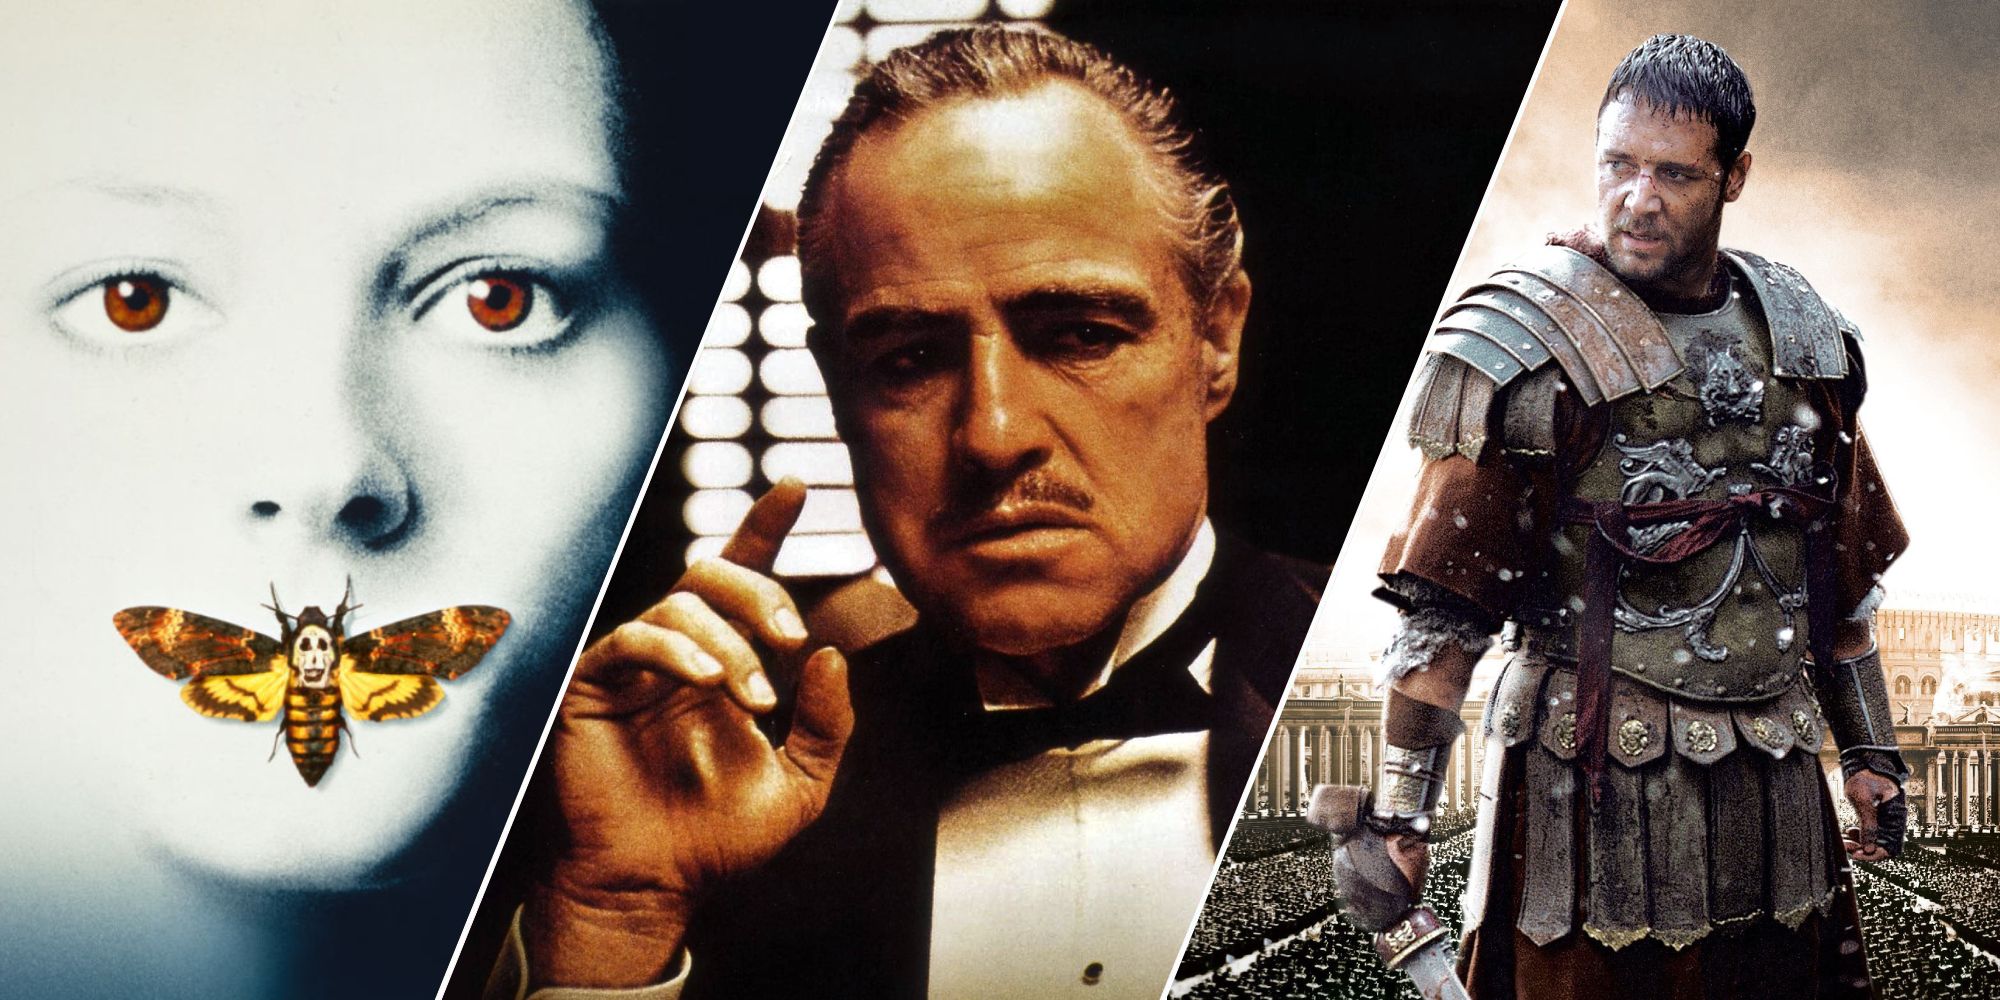 The Top 10 'Best Picture' Oscar Winners of All Time, Ranked According